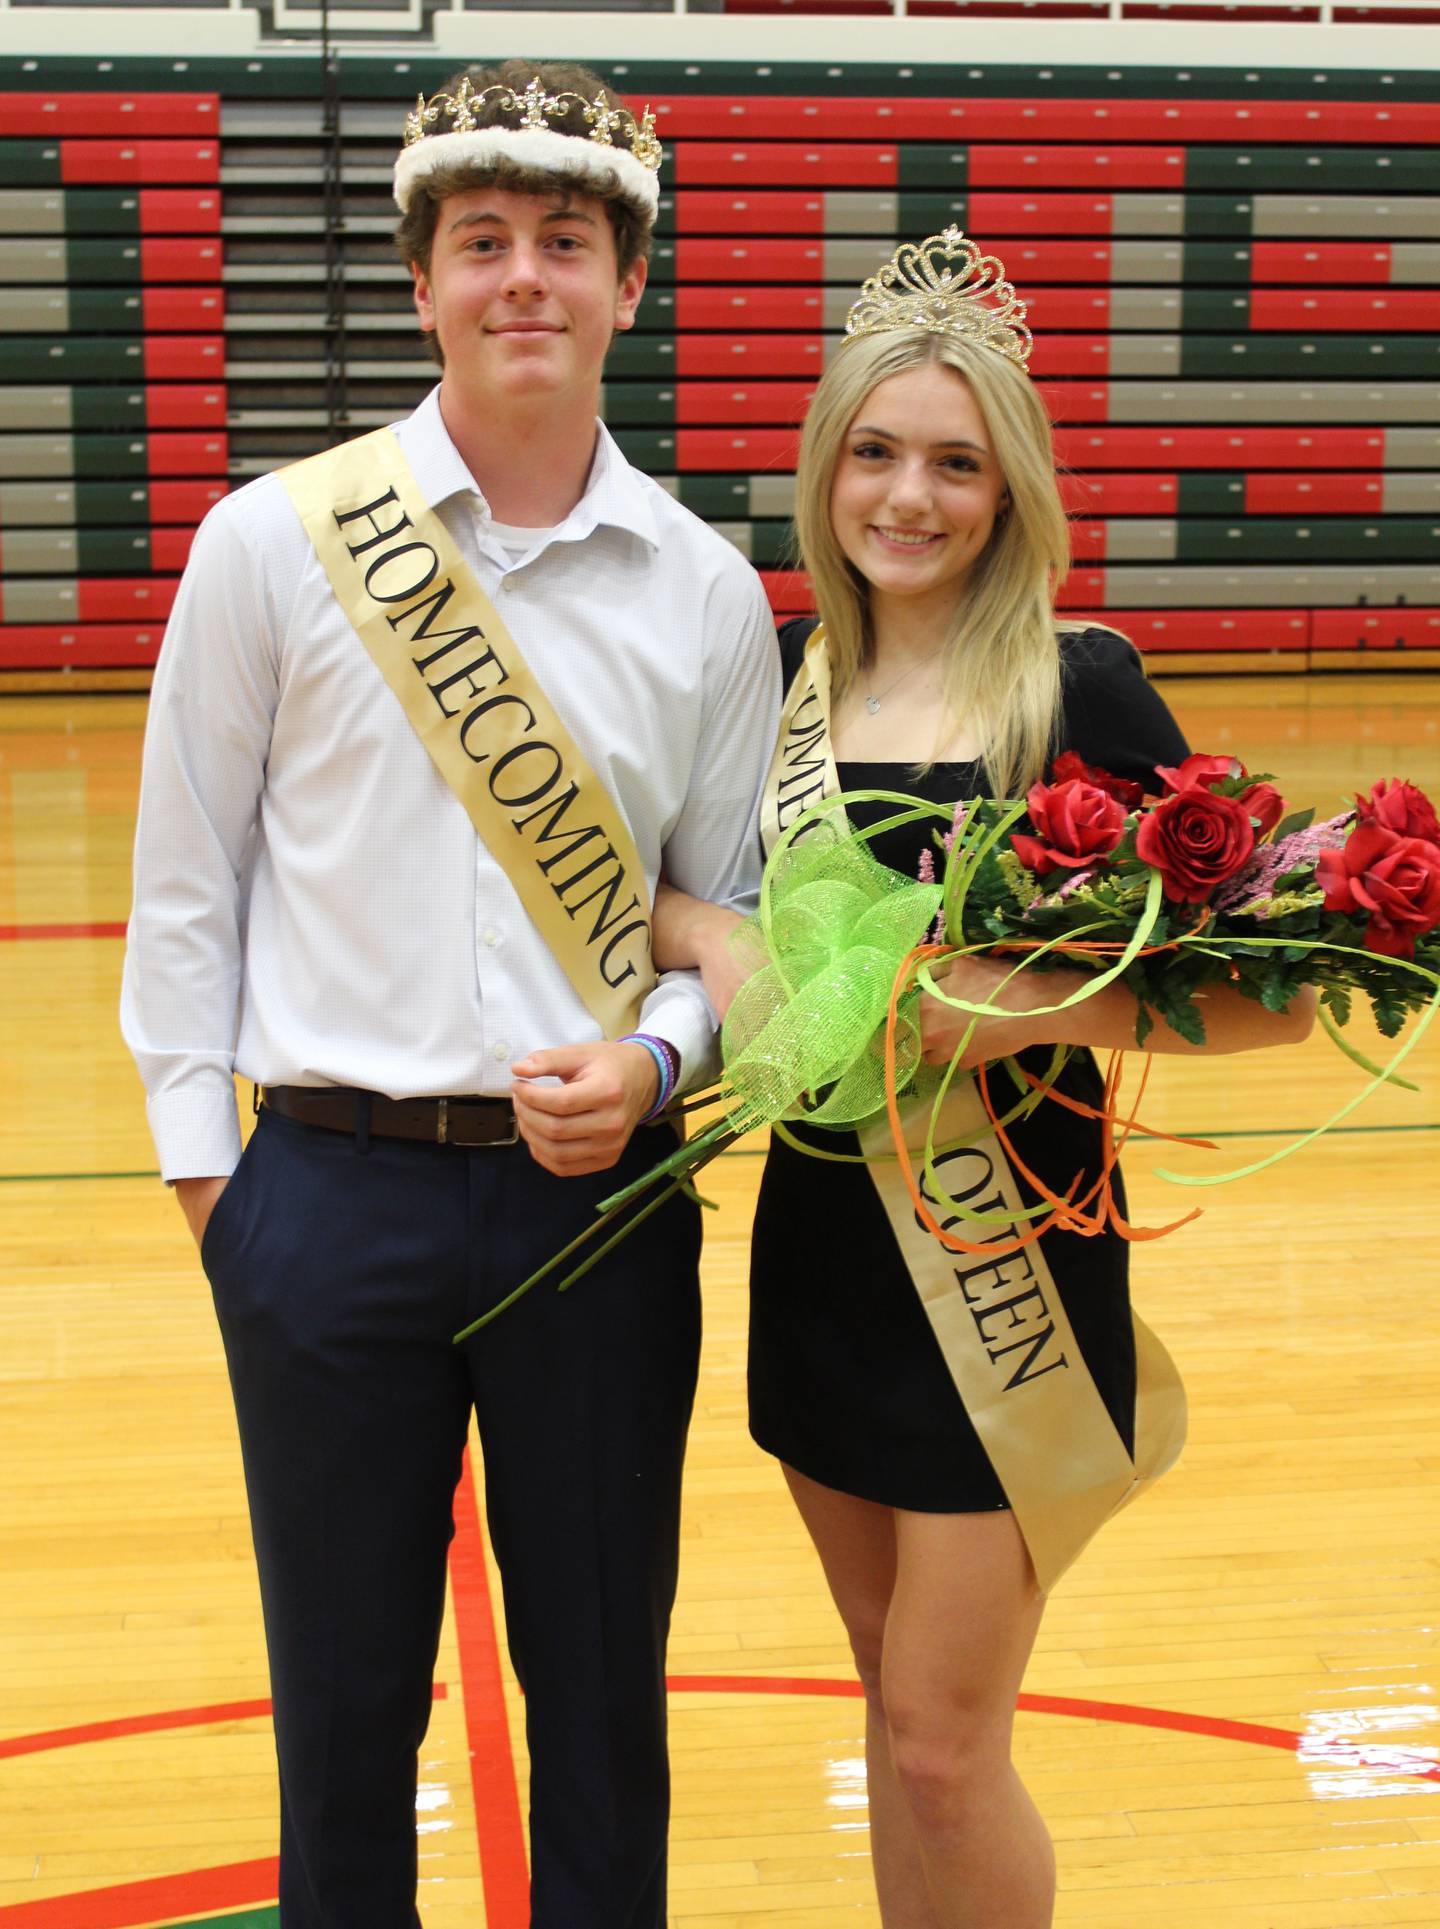 La Salle-Peru High School seniors Anna McLaughlin, of La Salle, and Tommy Hartman, of Utica, were named 2022 Homecoming queen and king during the LPHS Variety Show on Monday, Sept. 26, 2022, in Sellett Gym.